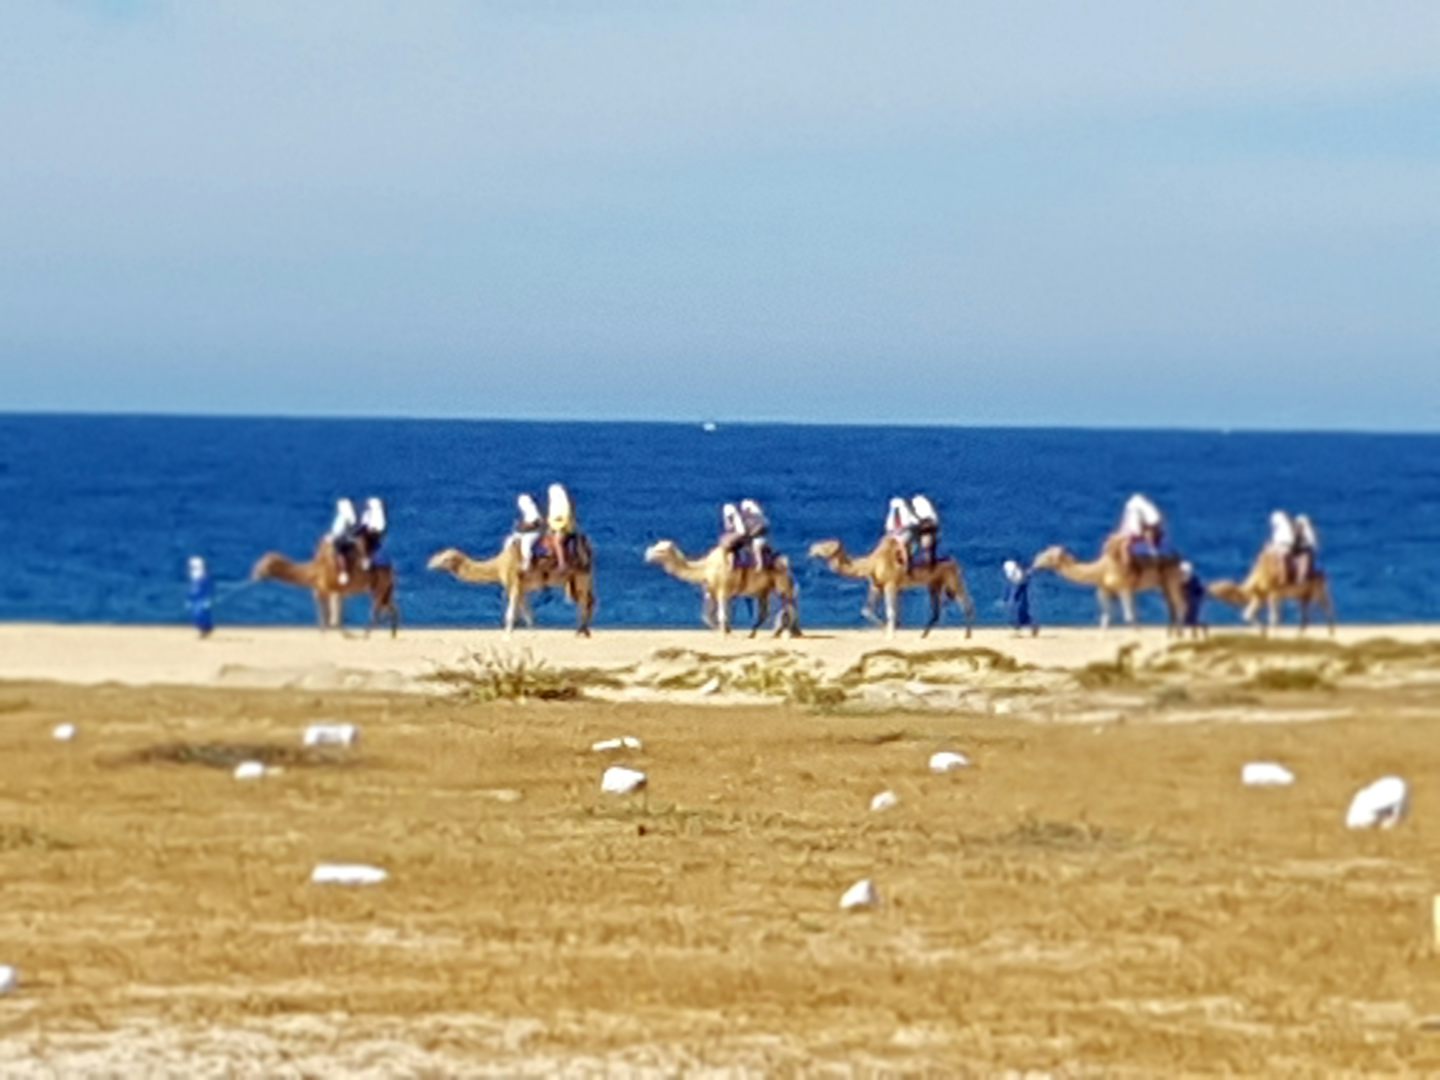 Camel ride in Cabo was top notch.